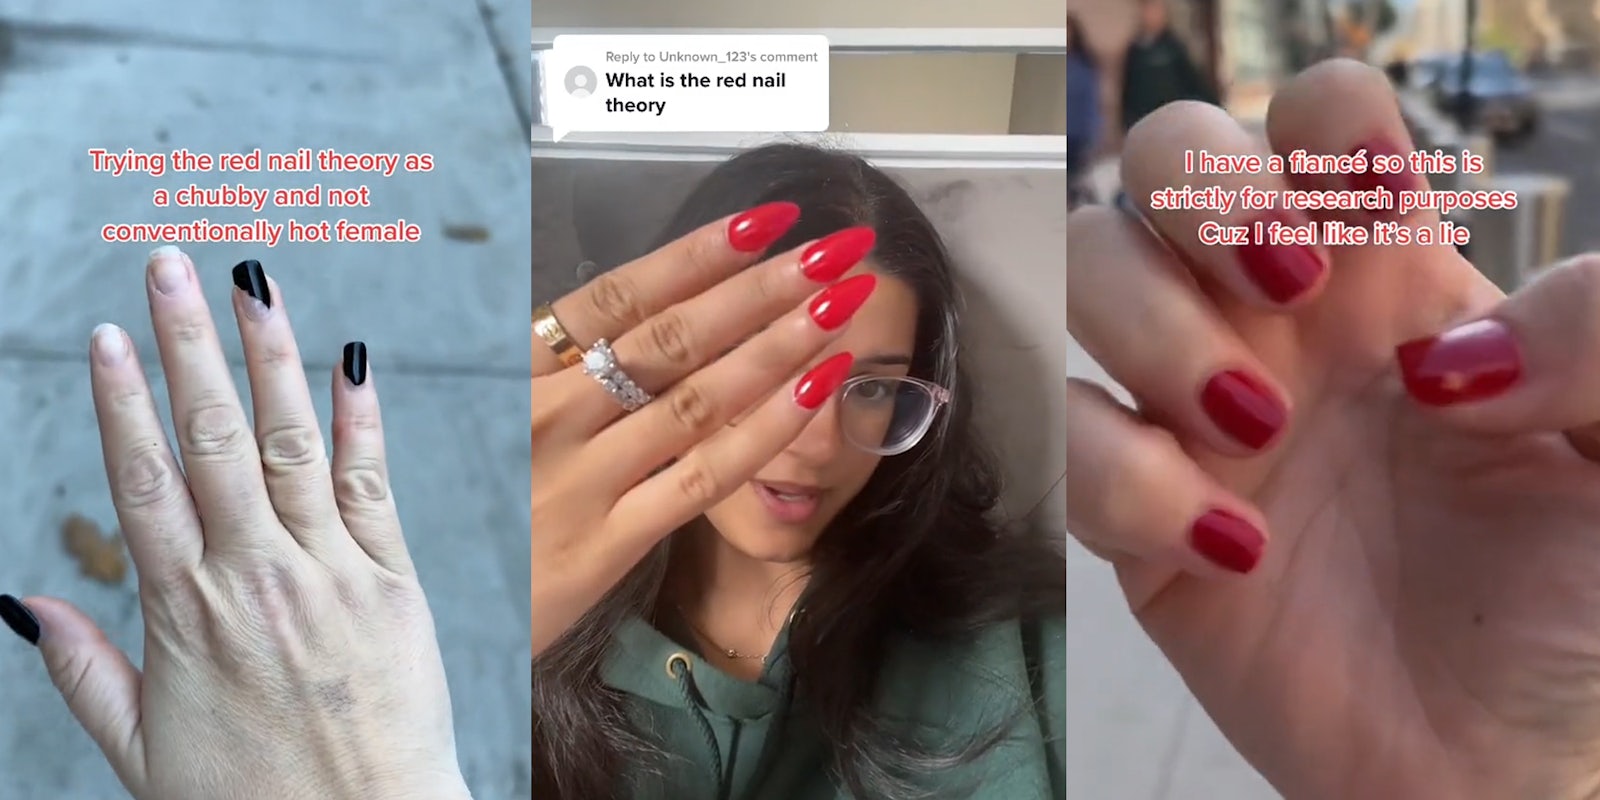 wp,am holding hand out with chipped black nails caption 'Trying the red nail theory as a chubby and not conventionally hot female' (l) woman speaking holding up red nails caption 'What is the red nail theory' (c) woman holding up red nails caption 'I have a fiance so this is strictly for research purposes Cuz I feel like its a lie' (r)